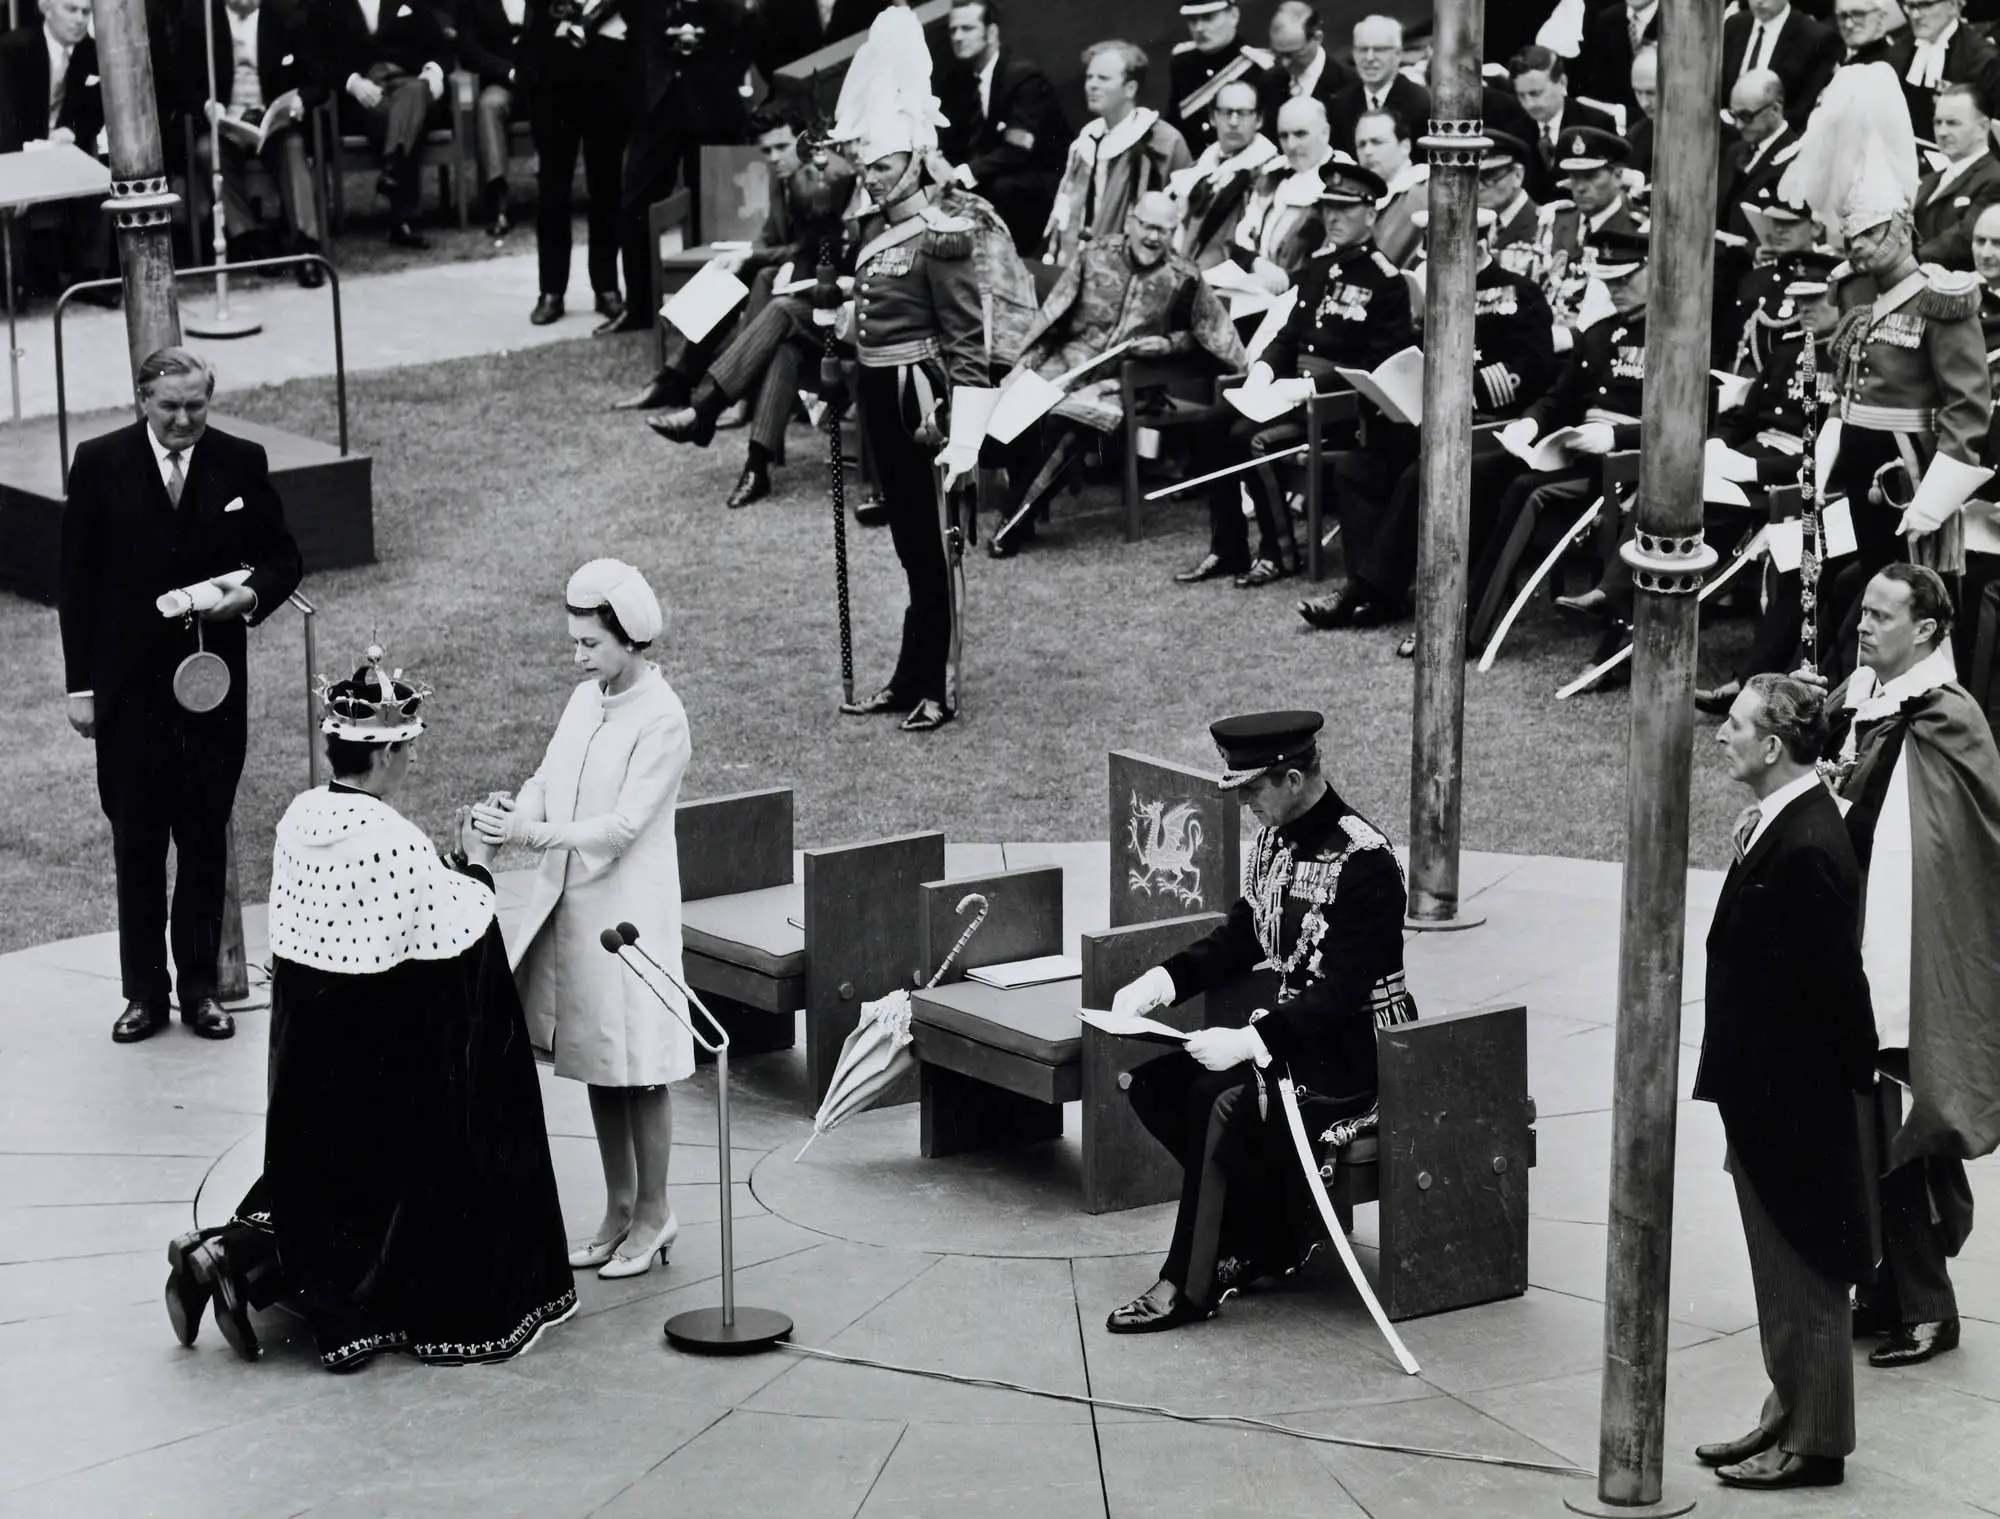 Prince Charles Investiture as Prince of Wales